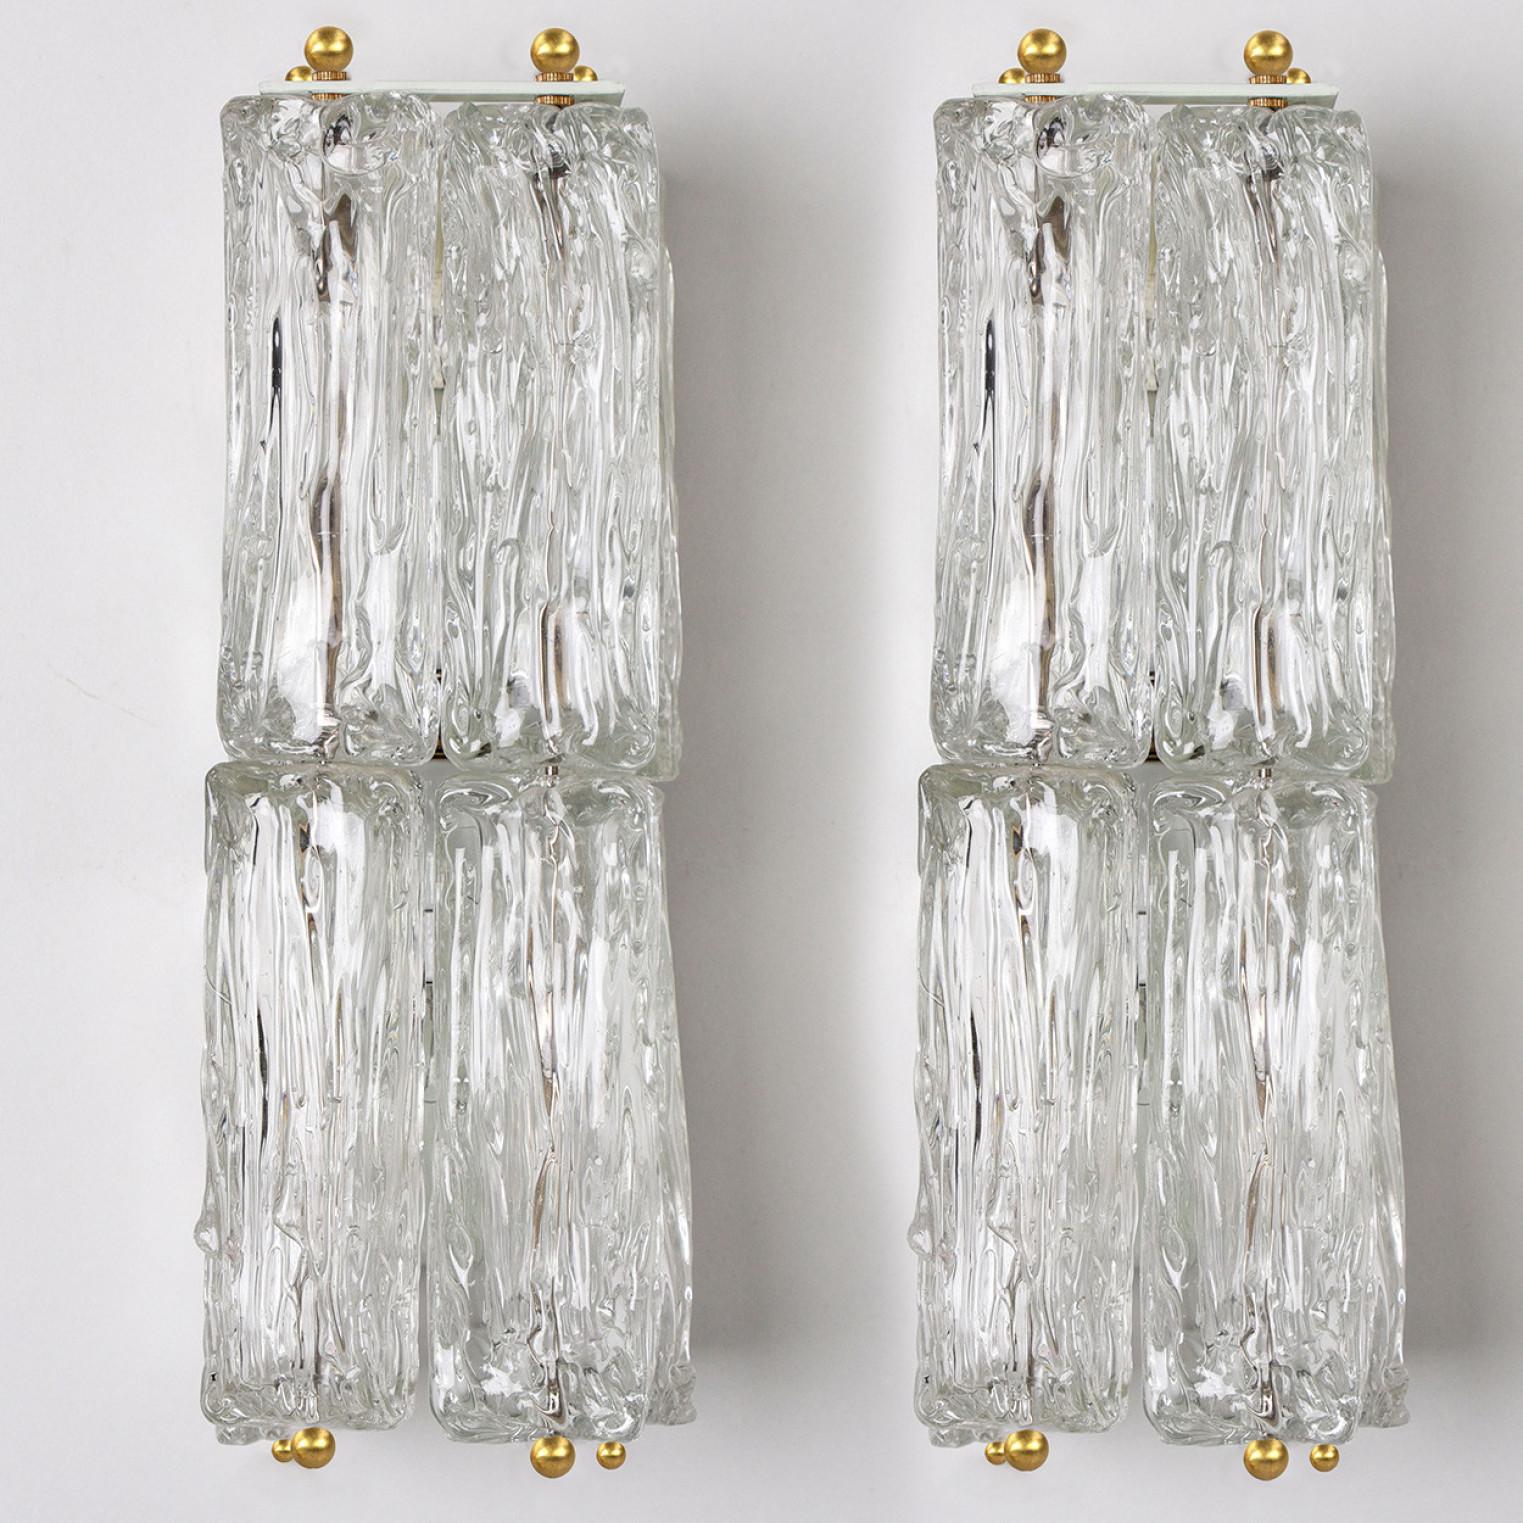 Pair of Thick Textured Glass and Brass Wall Lights by J.T. Kalmar, Austria, 1960 For Sale 3